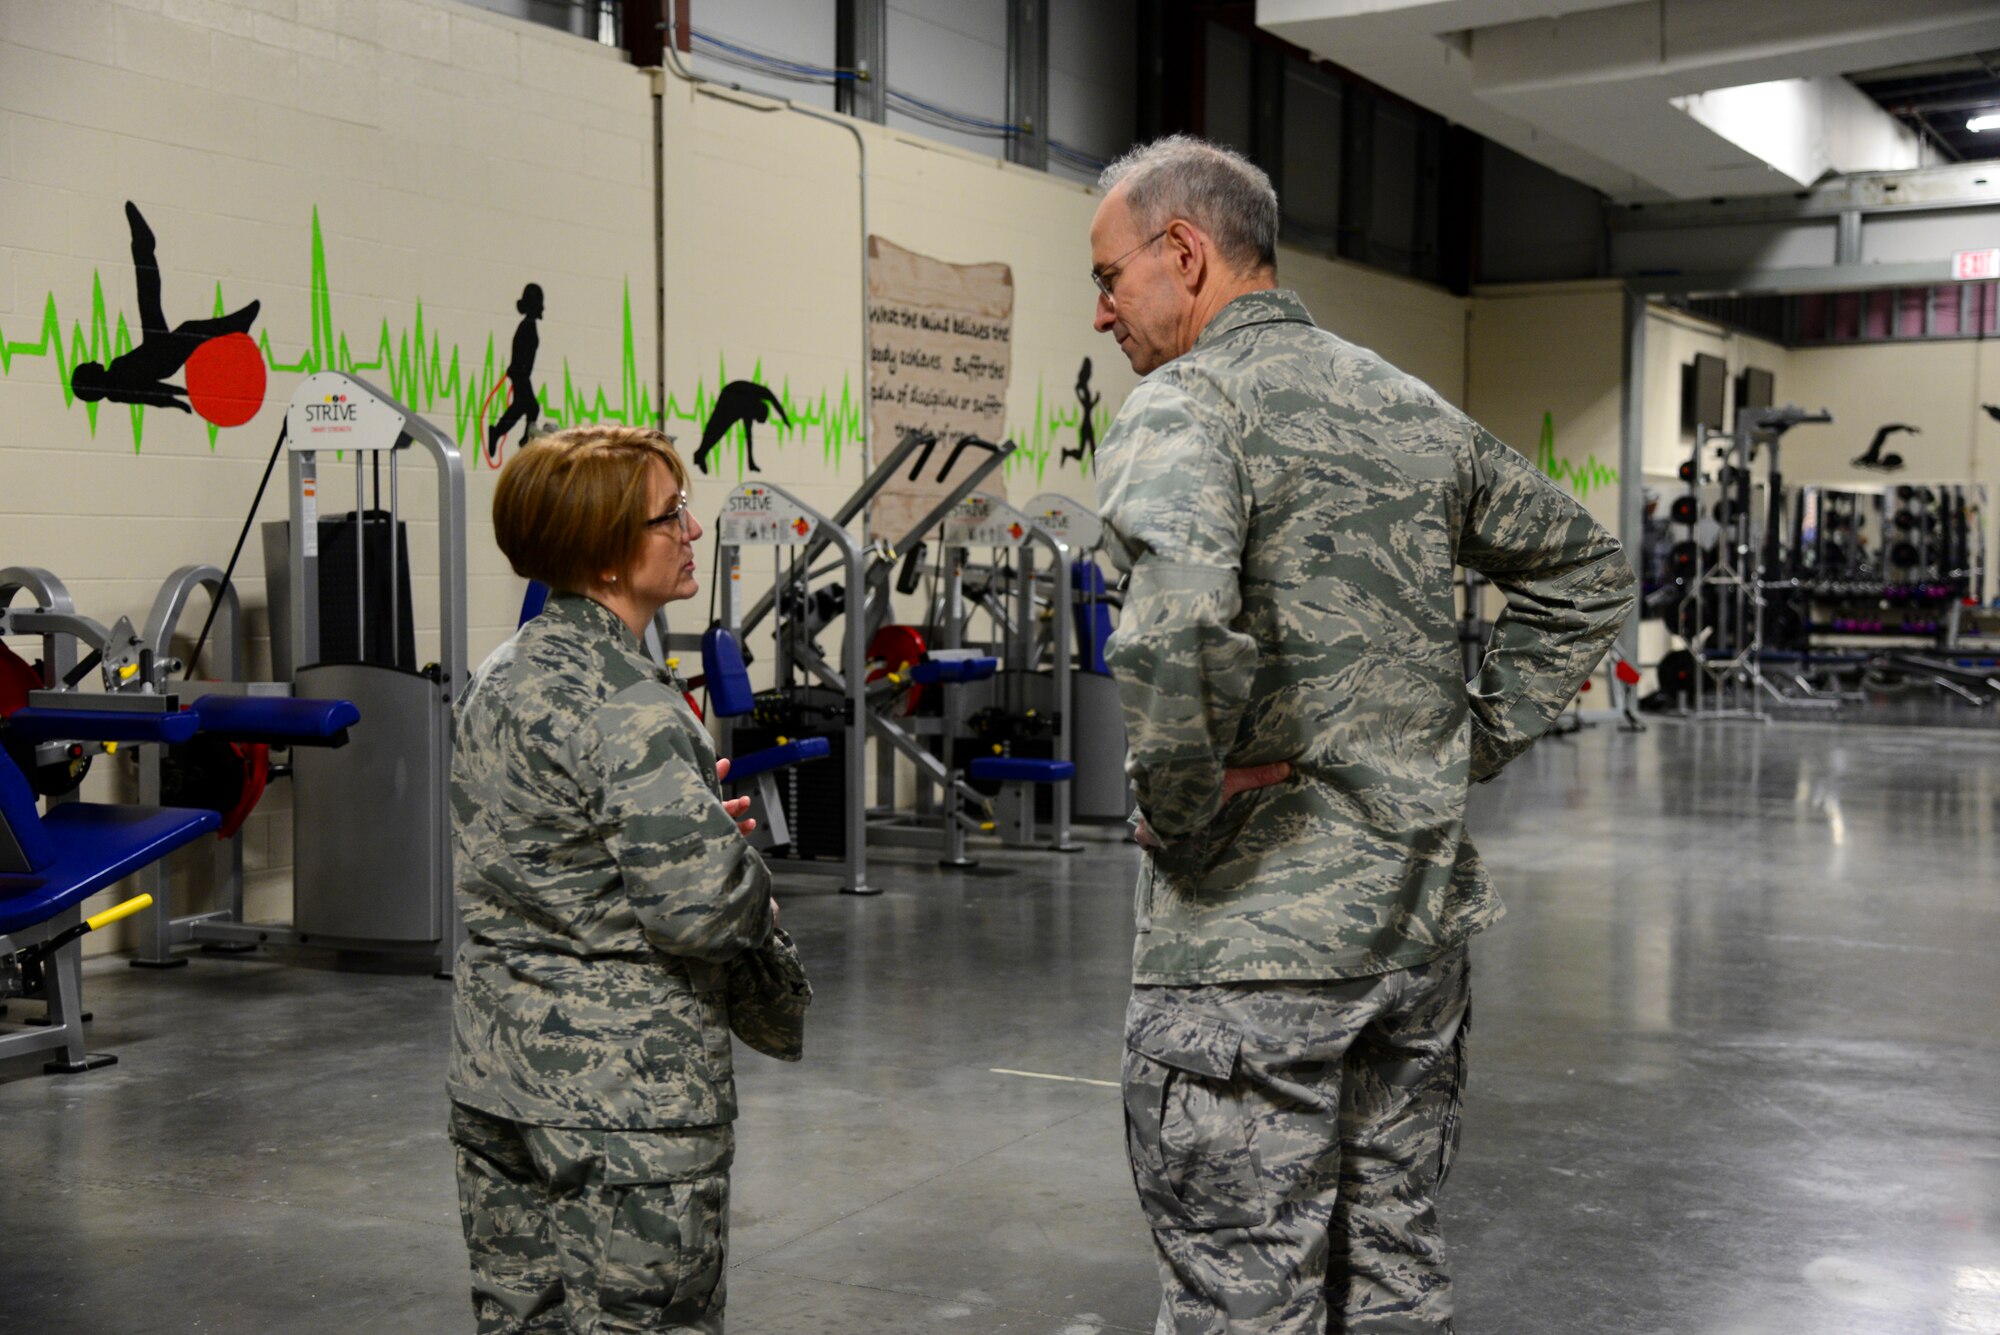 Col. Dawn Lancaster, Air Force Mortuary Affairs Operations commander, speaks with Air Force Surgeon General Lt. Gen. (Dr.) Mark Ediger in the AFMAO fitness facility during an orientation March 9, 2018, at Dover Air Force Base, Del. Lancaster explained the importance of Comprehensive Airman Fitness, how it relates to the Airmen assigned to AFMAO and how their resilience programs encourage physical, mental, social and spiritual strength. (U.S. Air Force photo by Staff Sgt. Aaron J. Jenne)